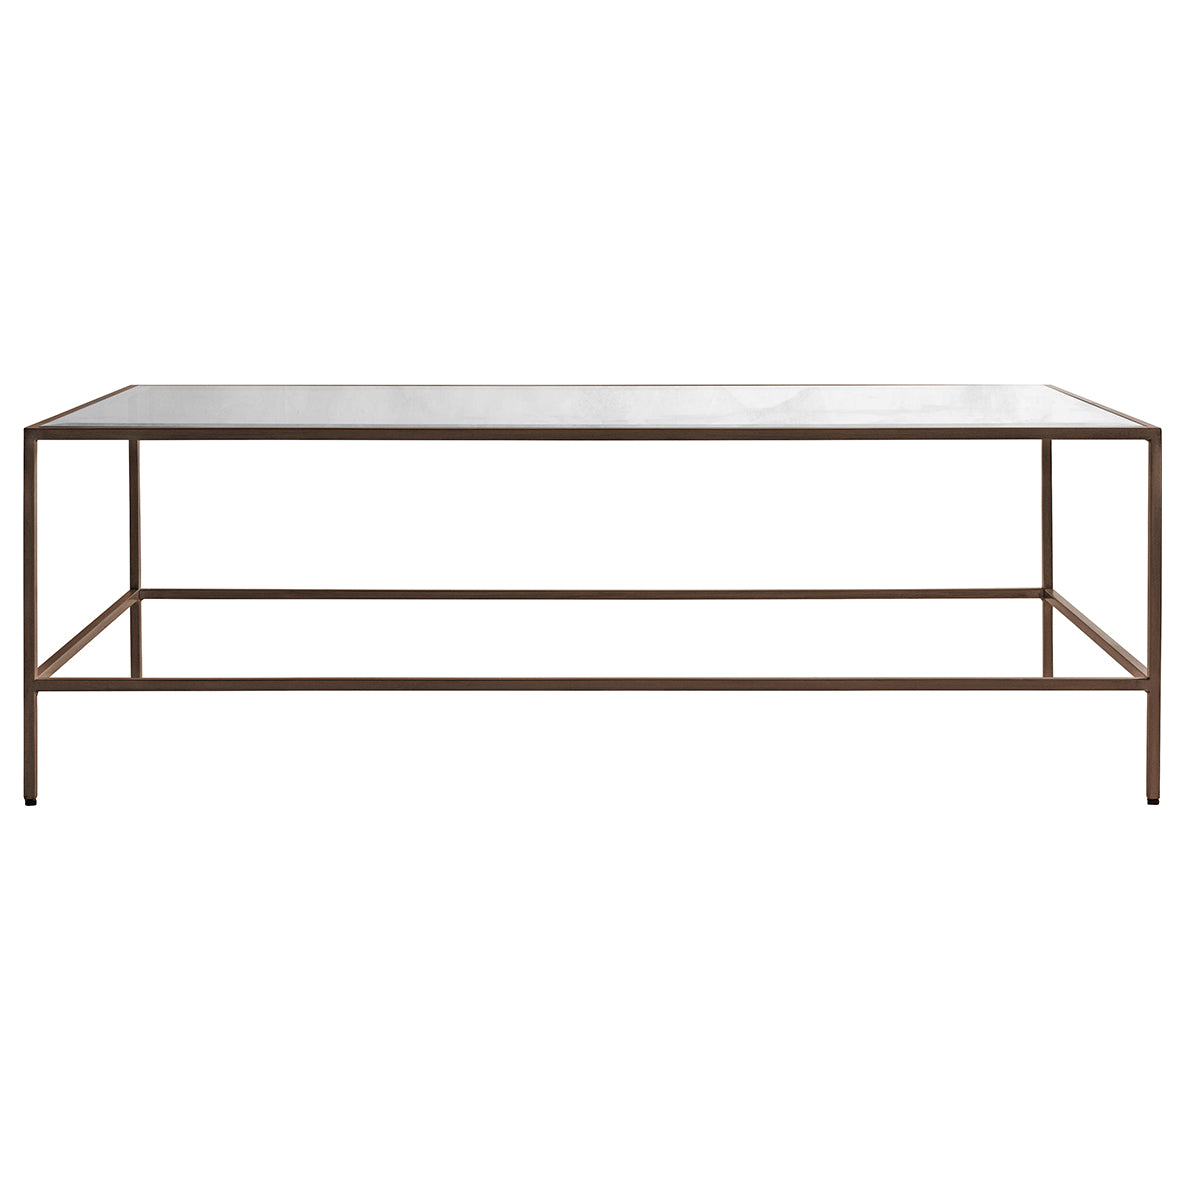 An Engleborne Coffee Table Bronze 1200x650x400mm with a metal frame and glass top for interior decor.